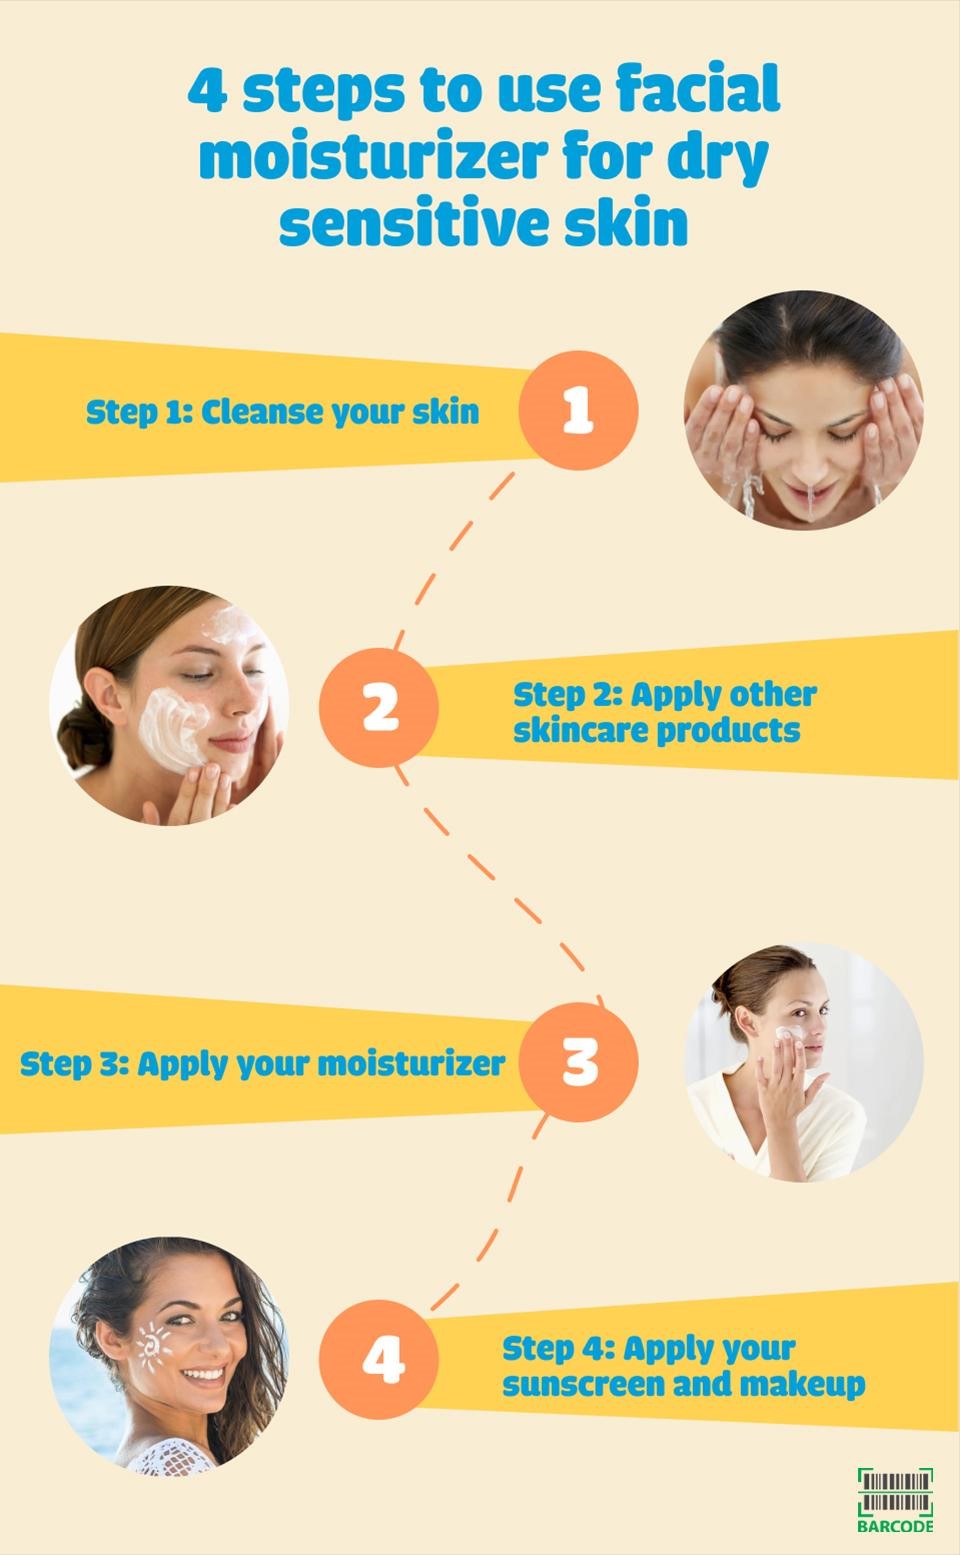 A complete guide on applying facial moisturizer